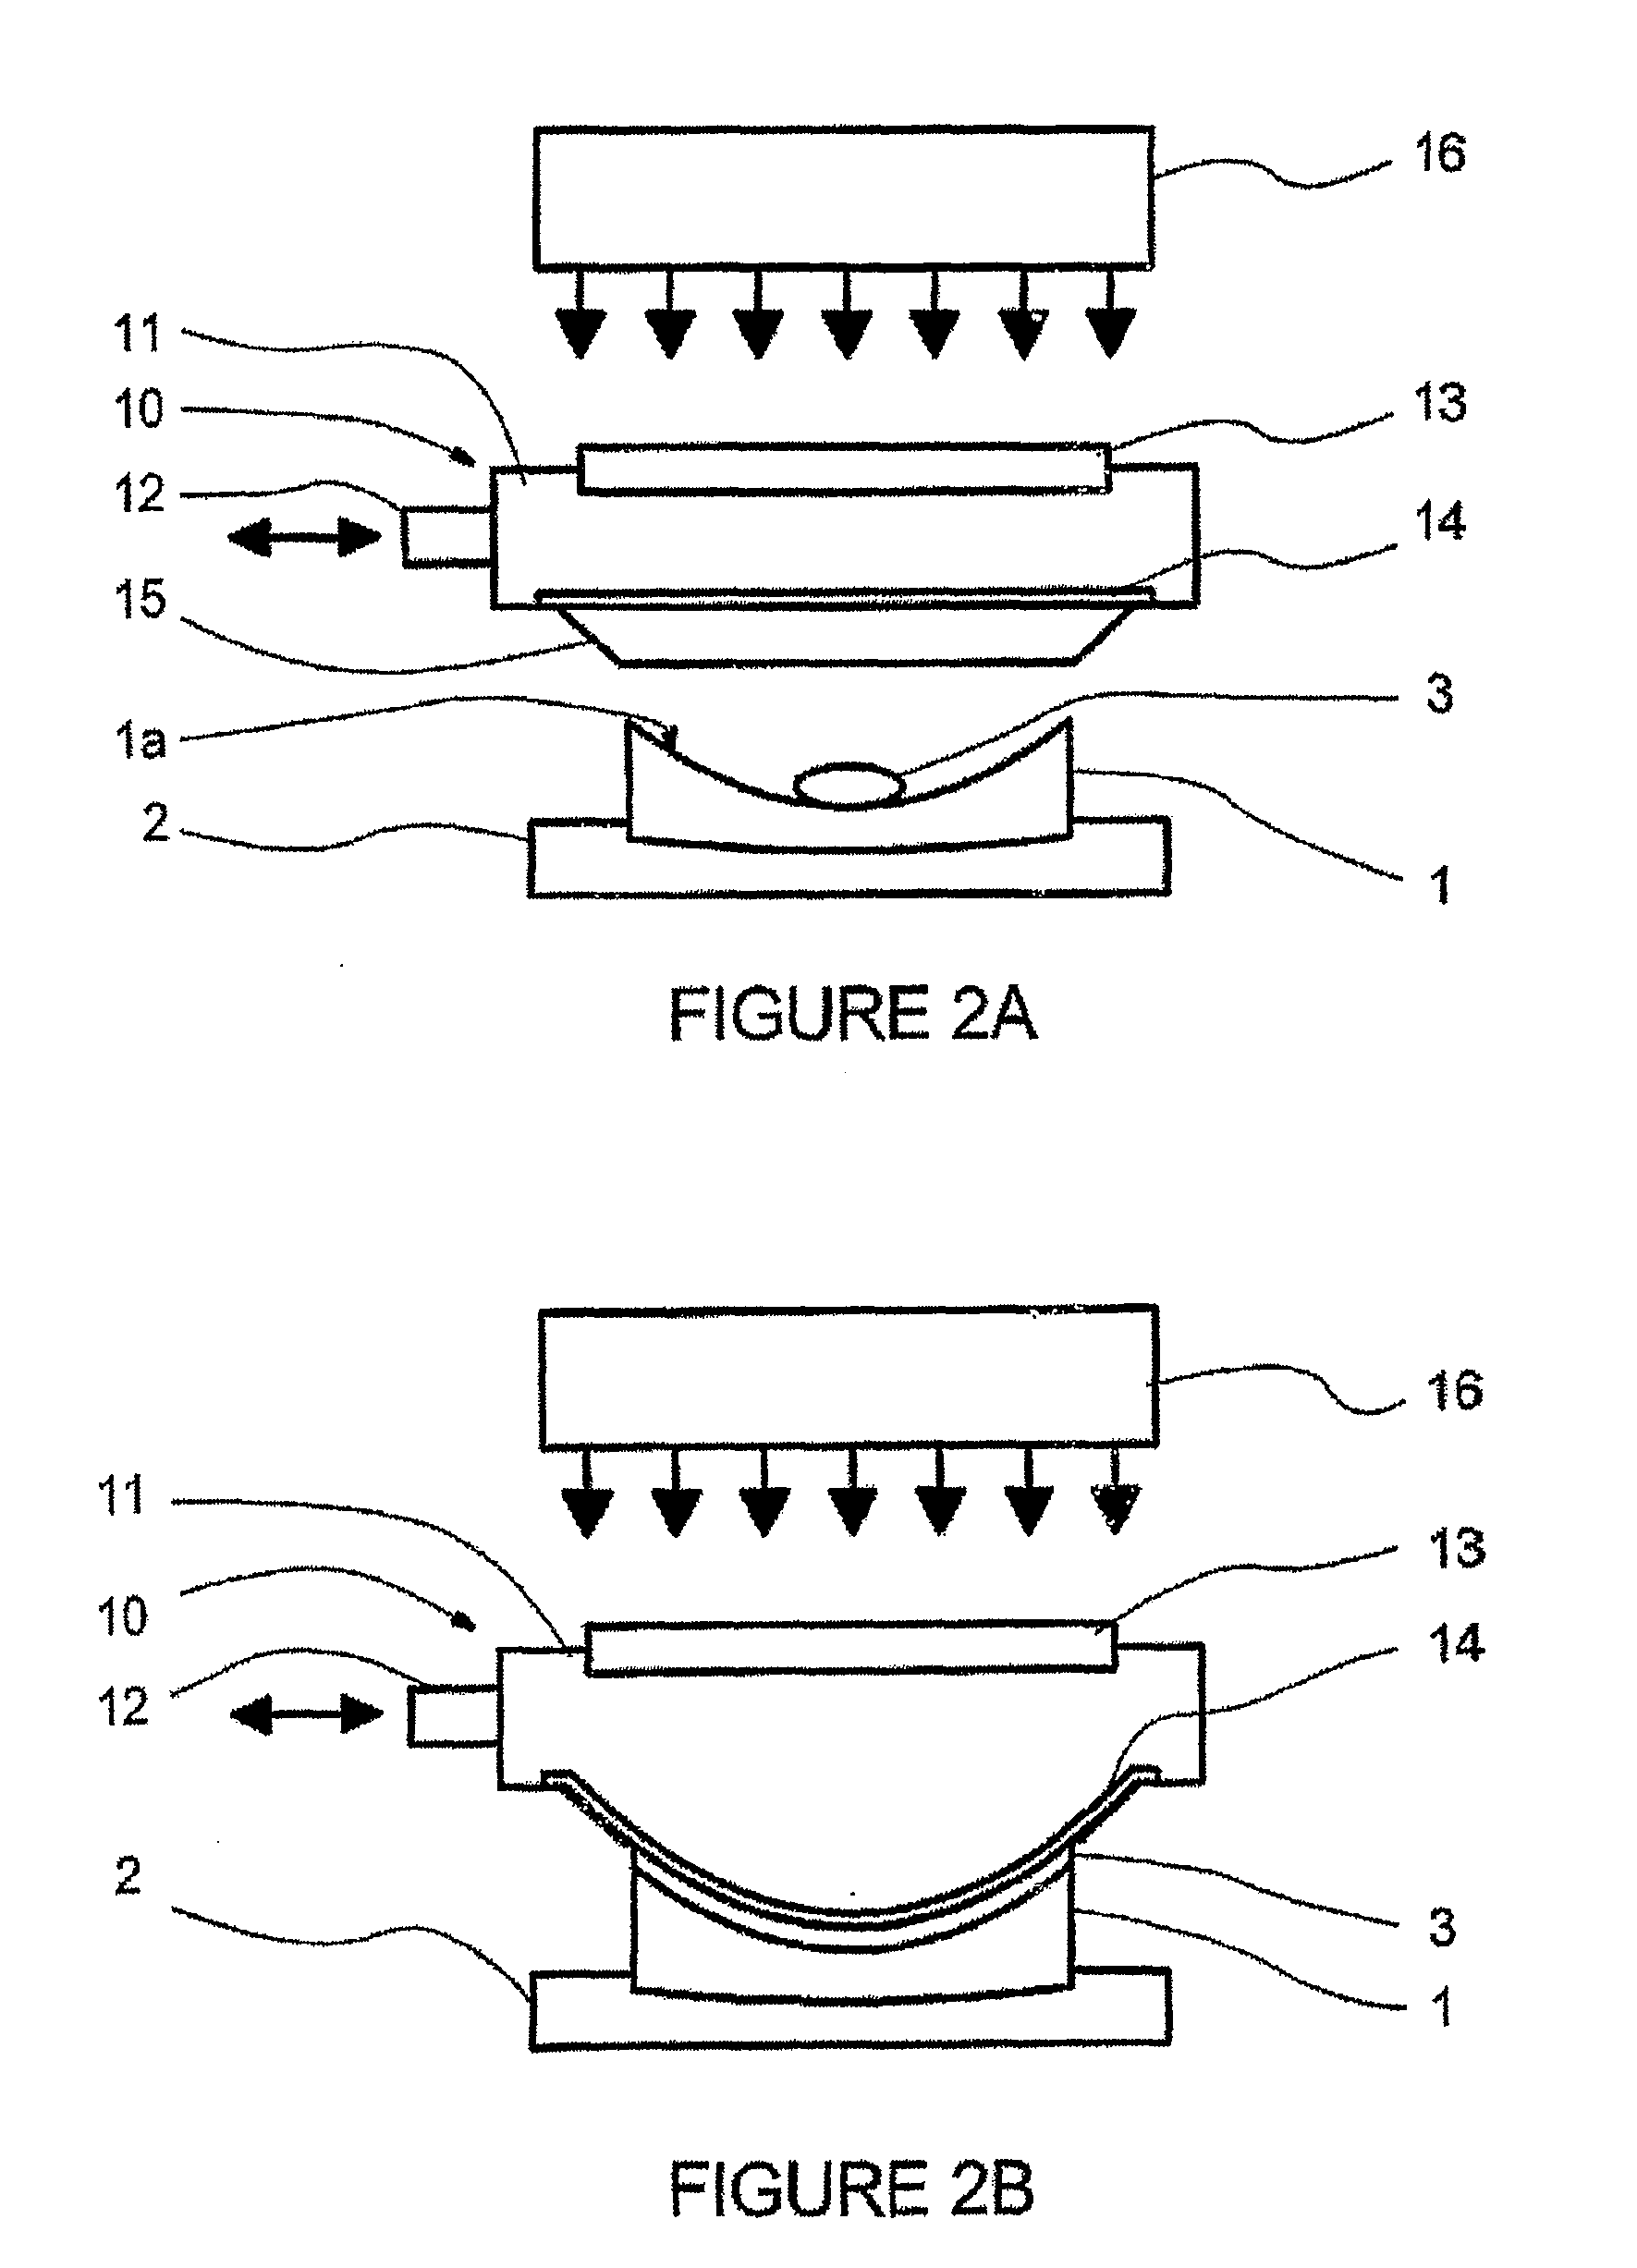 Process for Making a Coated Optical Lens Free of Visible Fining Lines